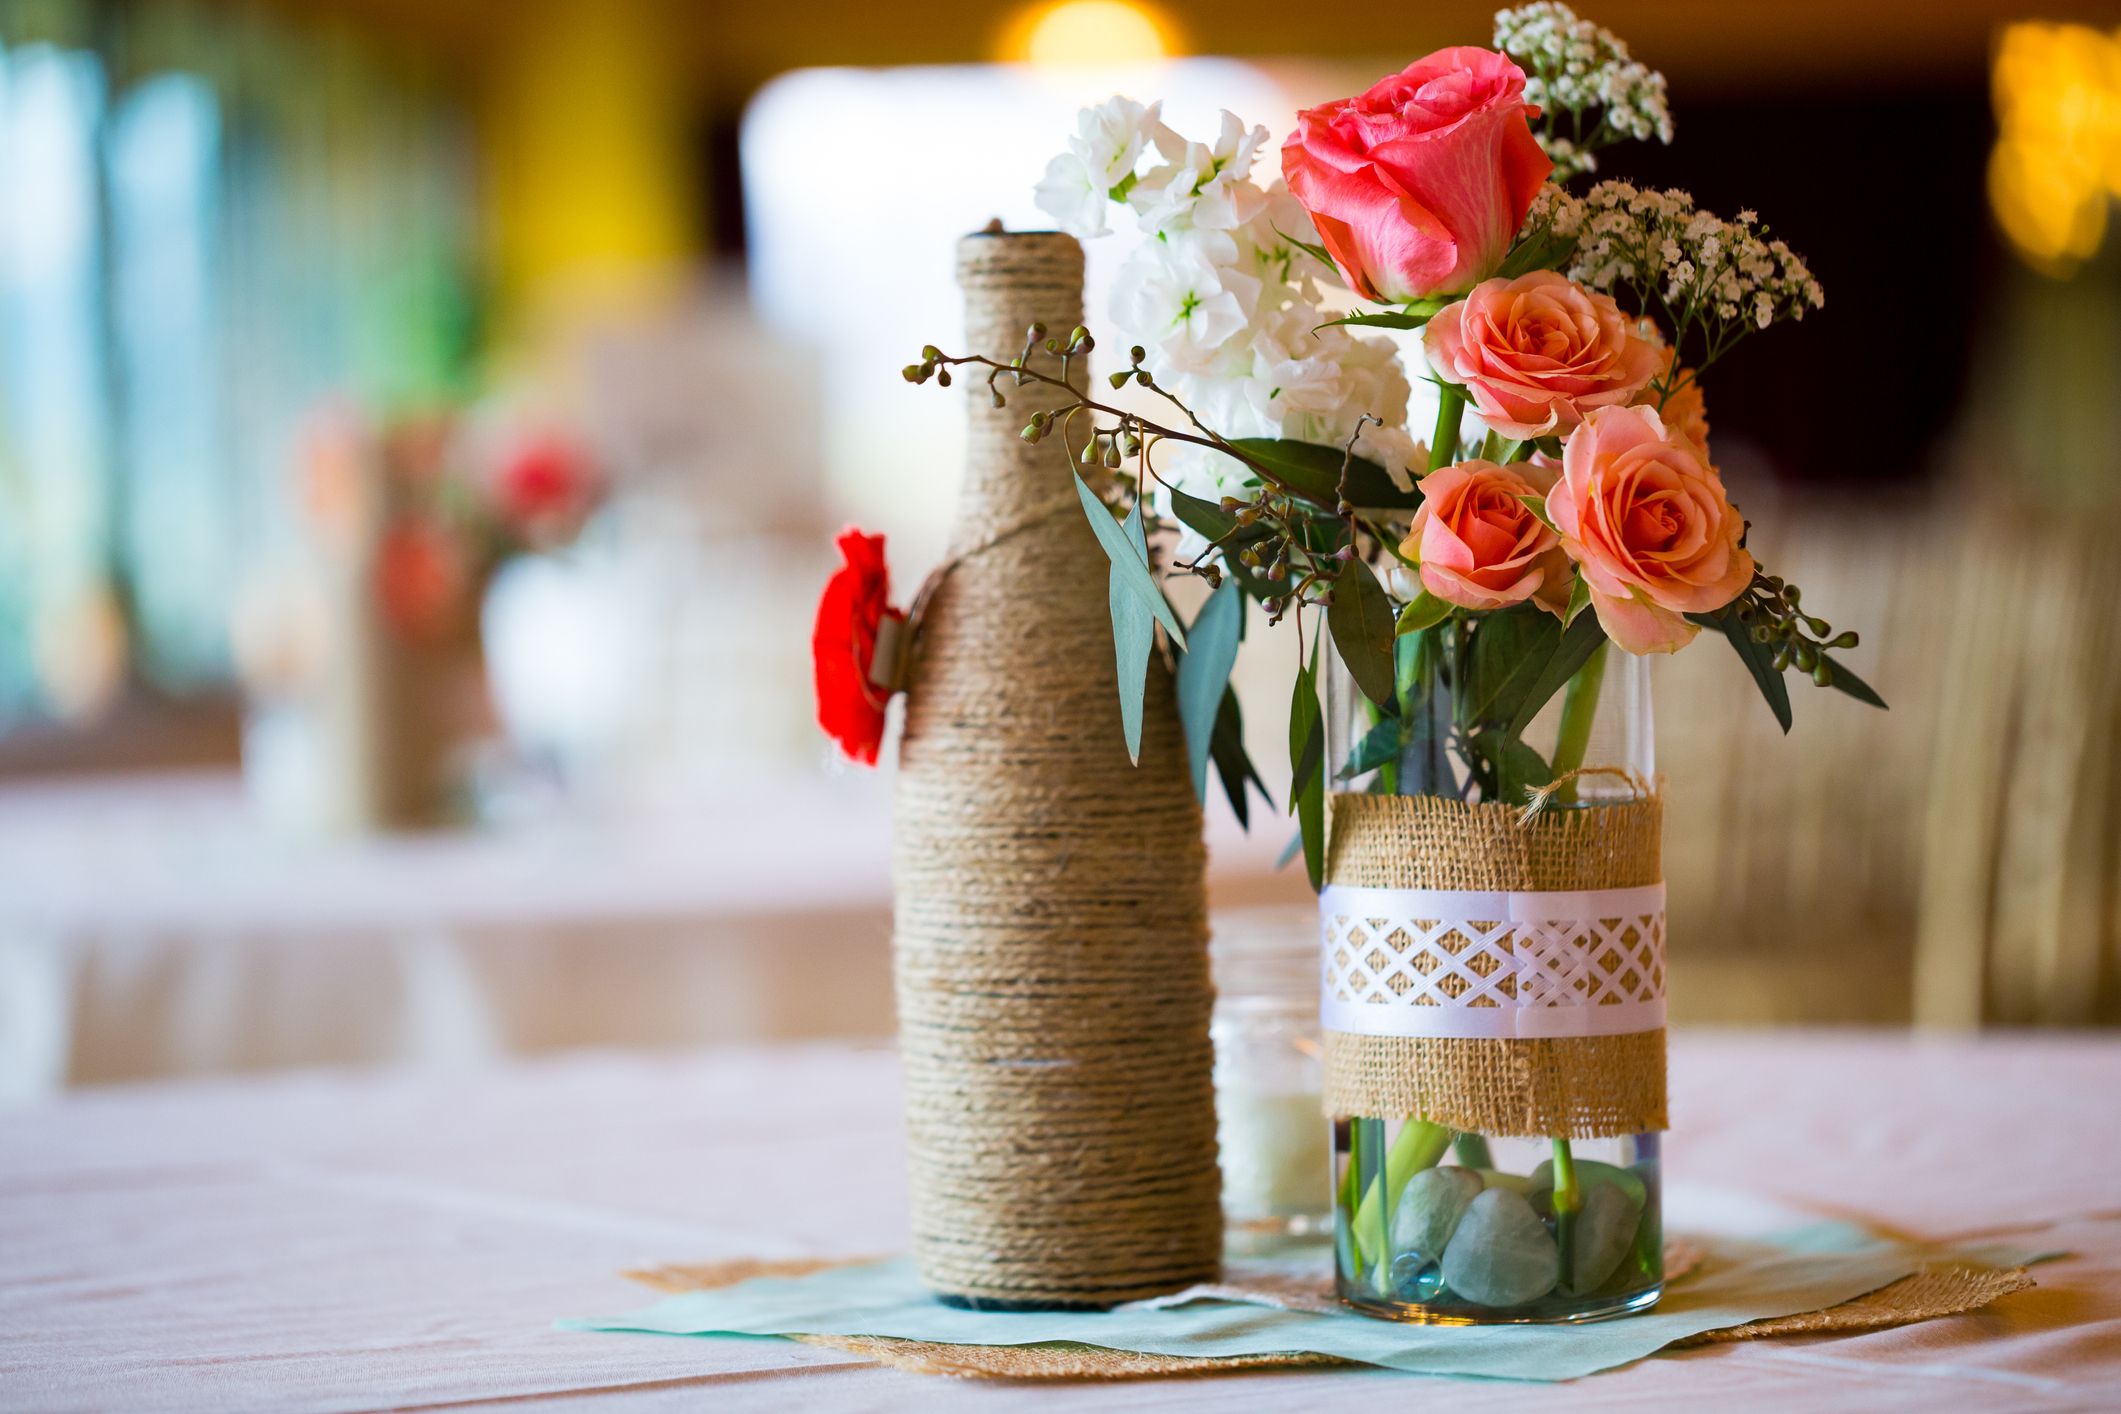 What Is The Cheapest Florist Table Centerpiece?